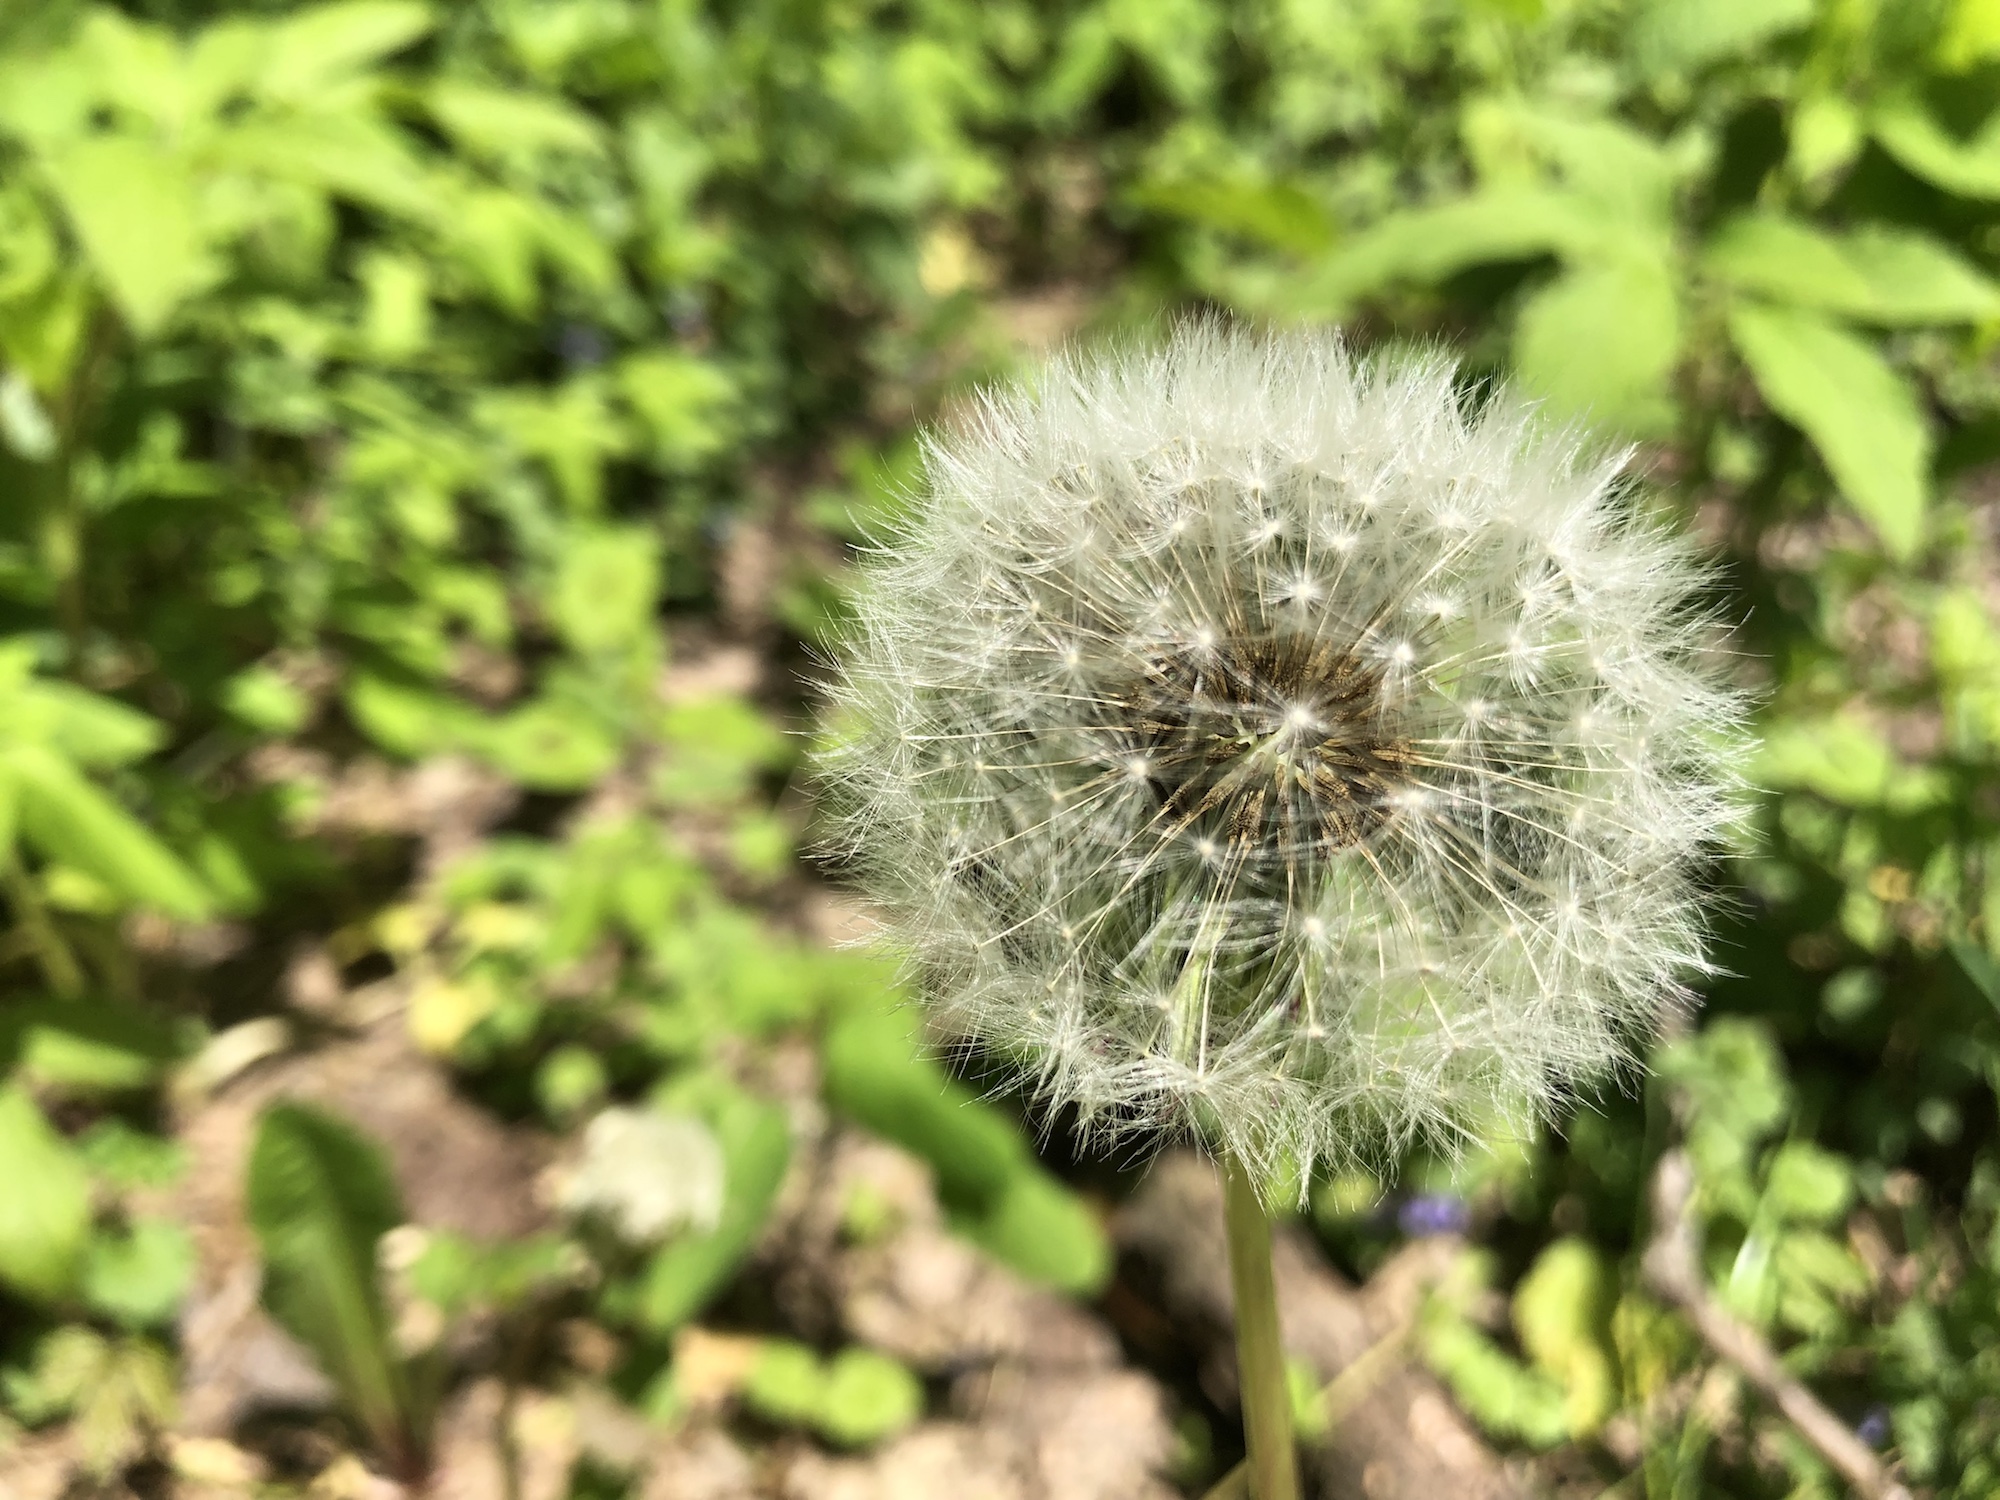 Dandelion puffball in Nakoma Park in Madison Wisconsin on May 26, 2020.